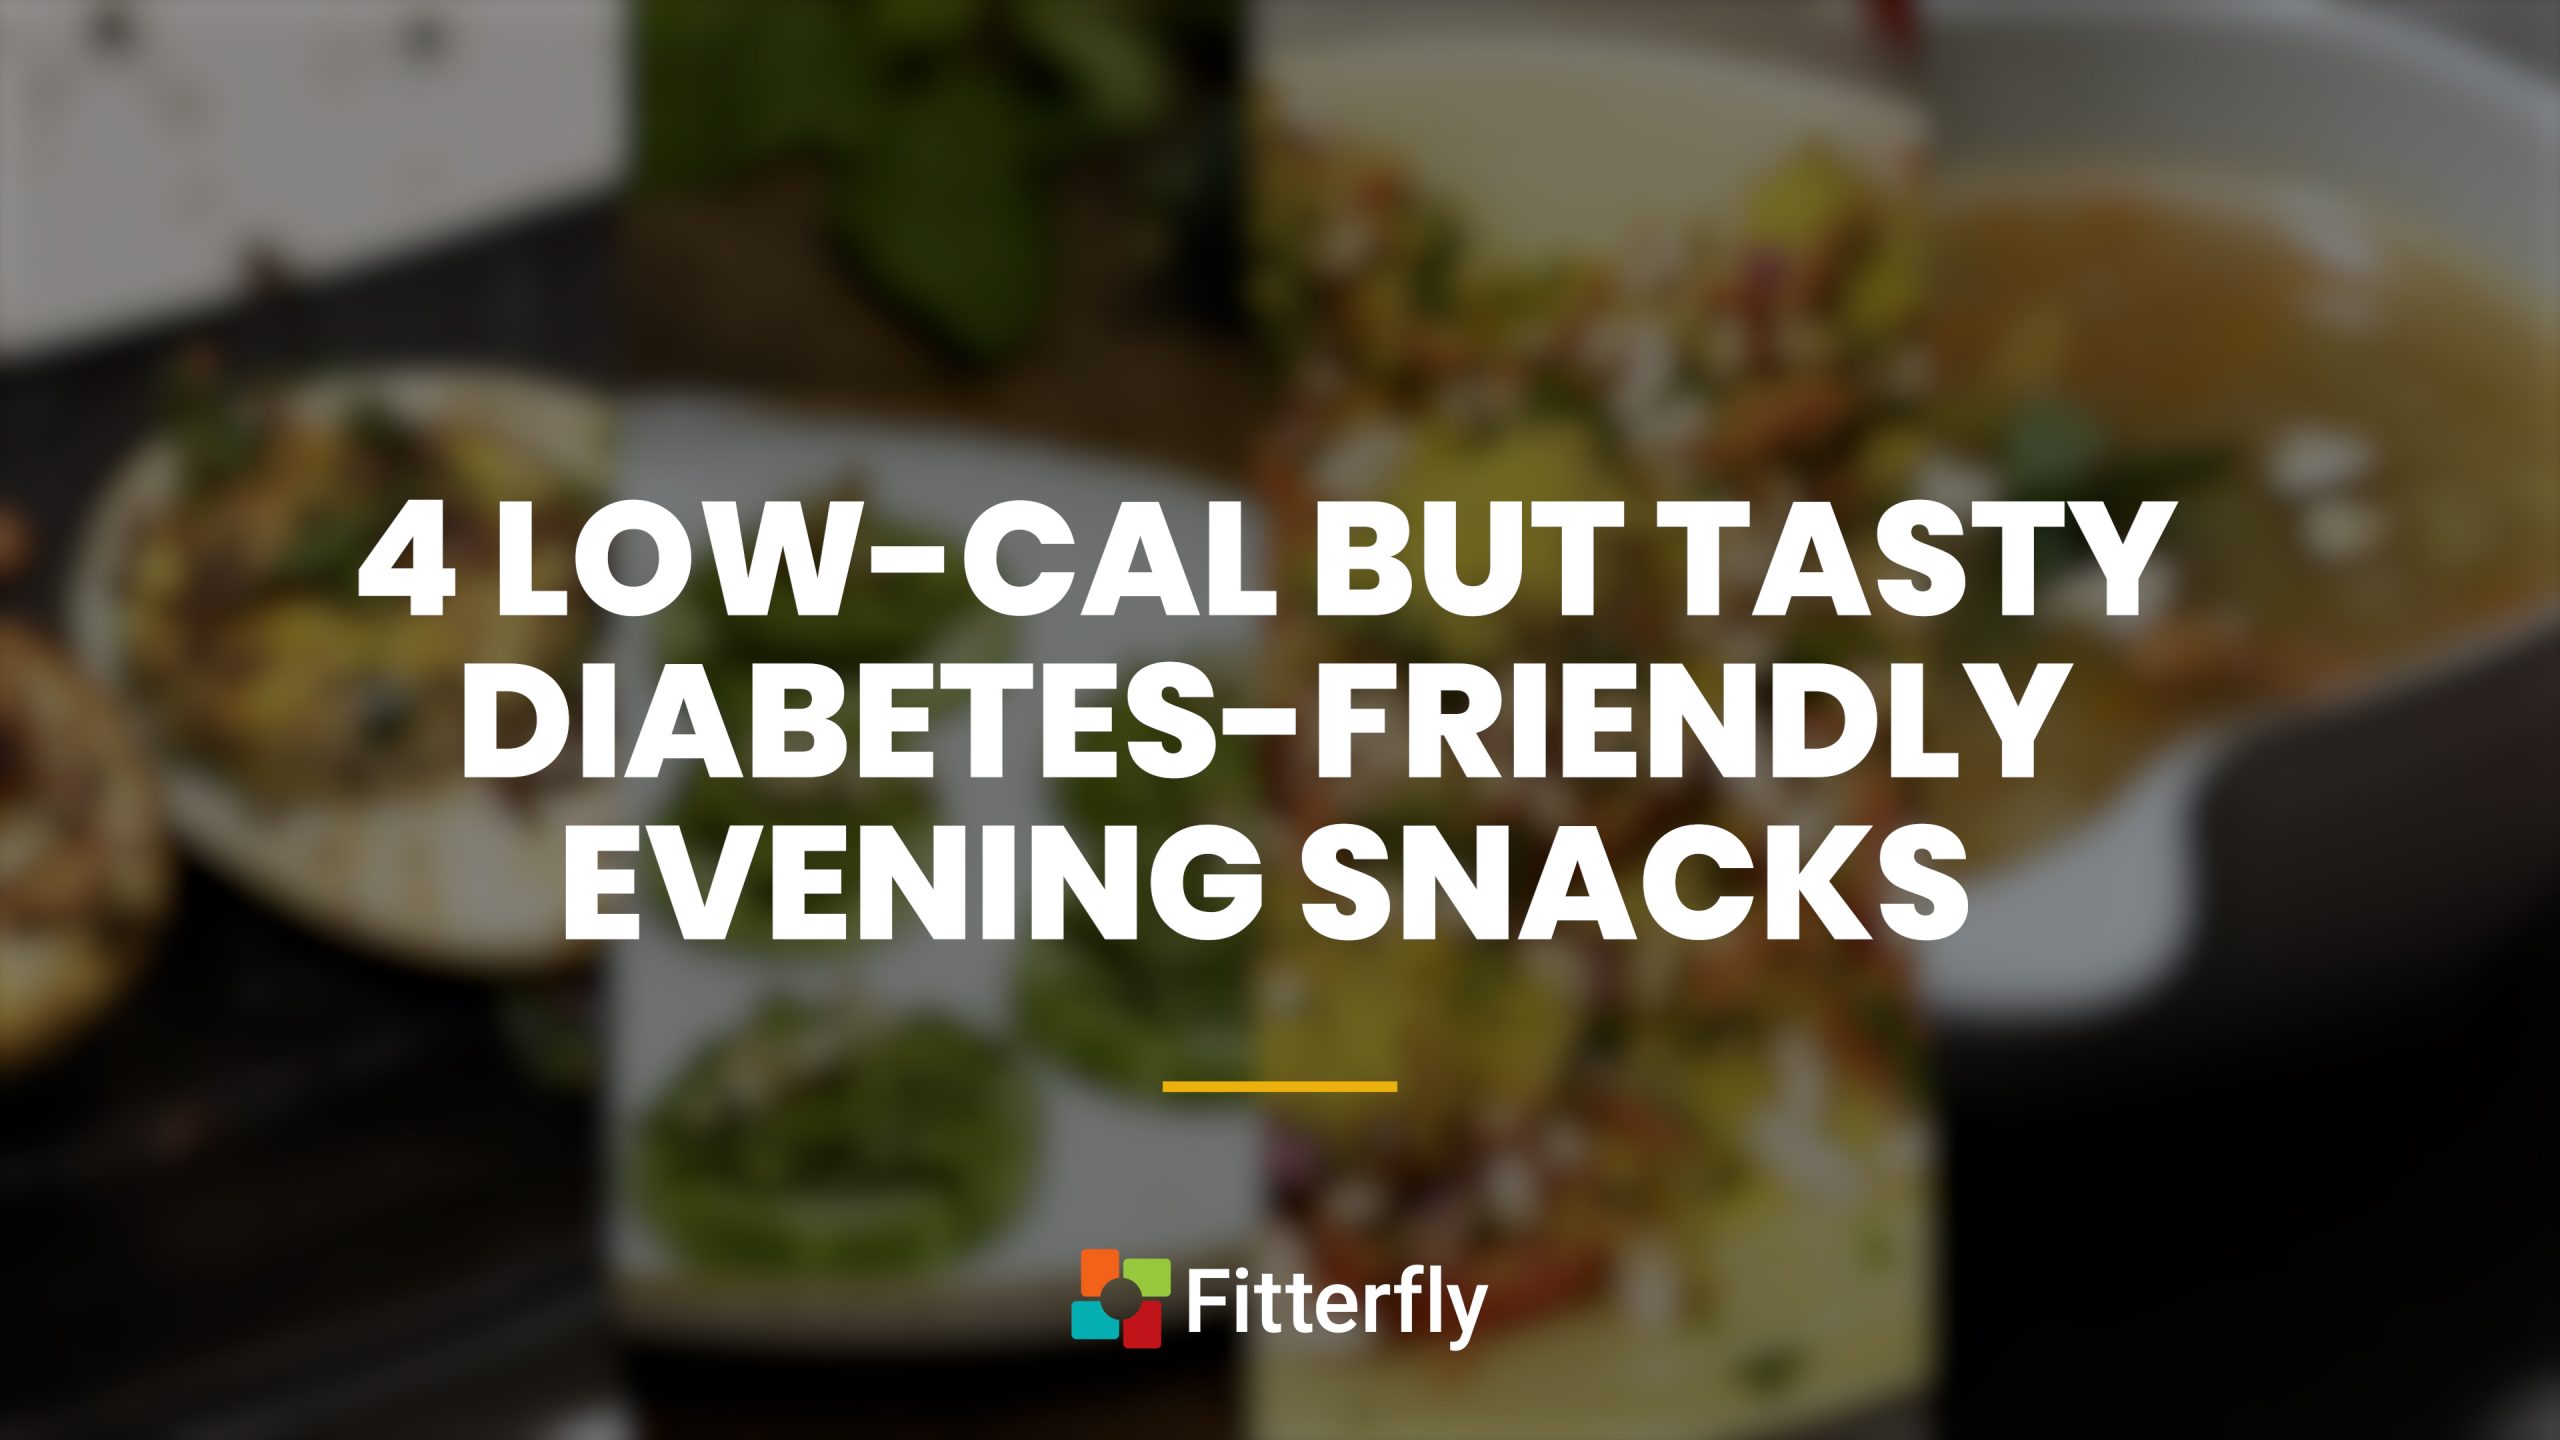 4 low-cal but tasty evening snacks for diabetes | Diabetes-Friendly Foods